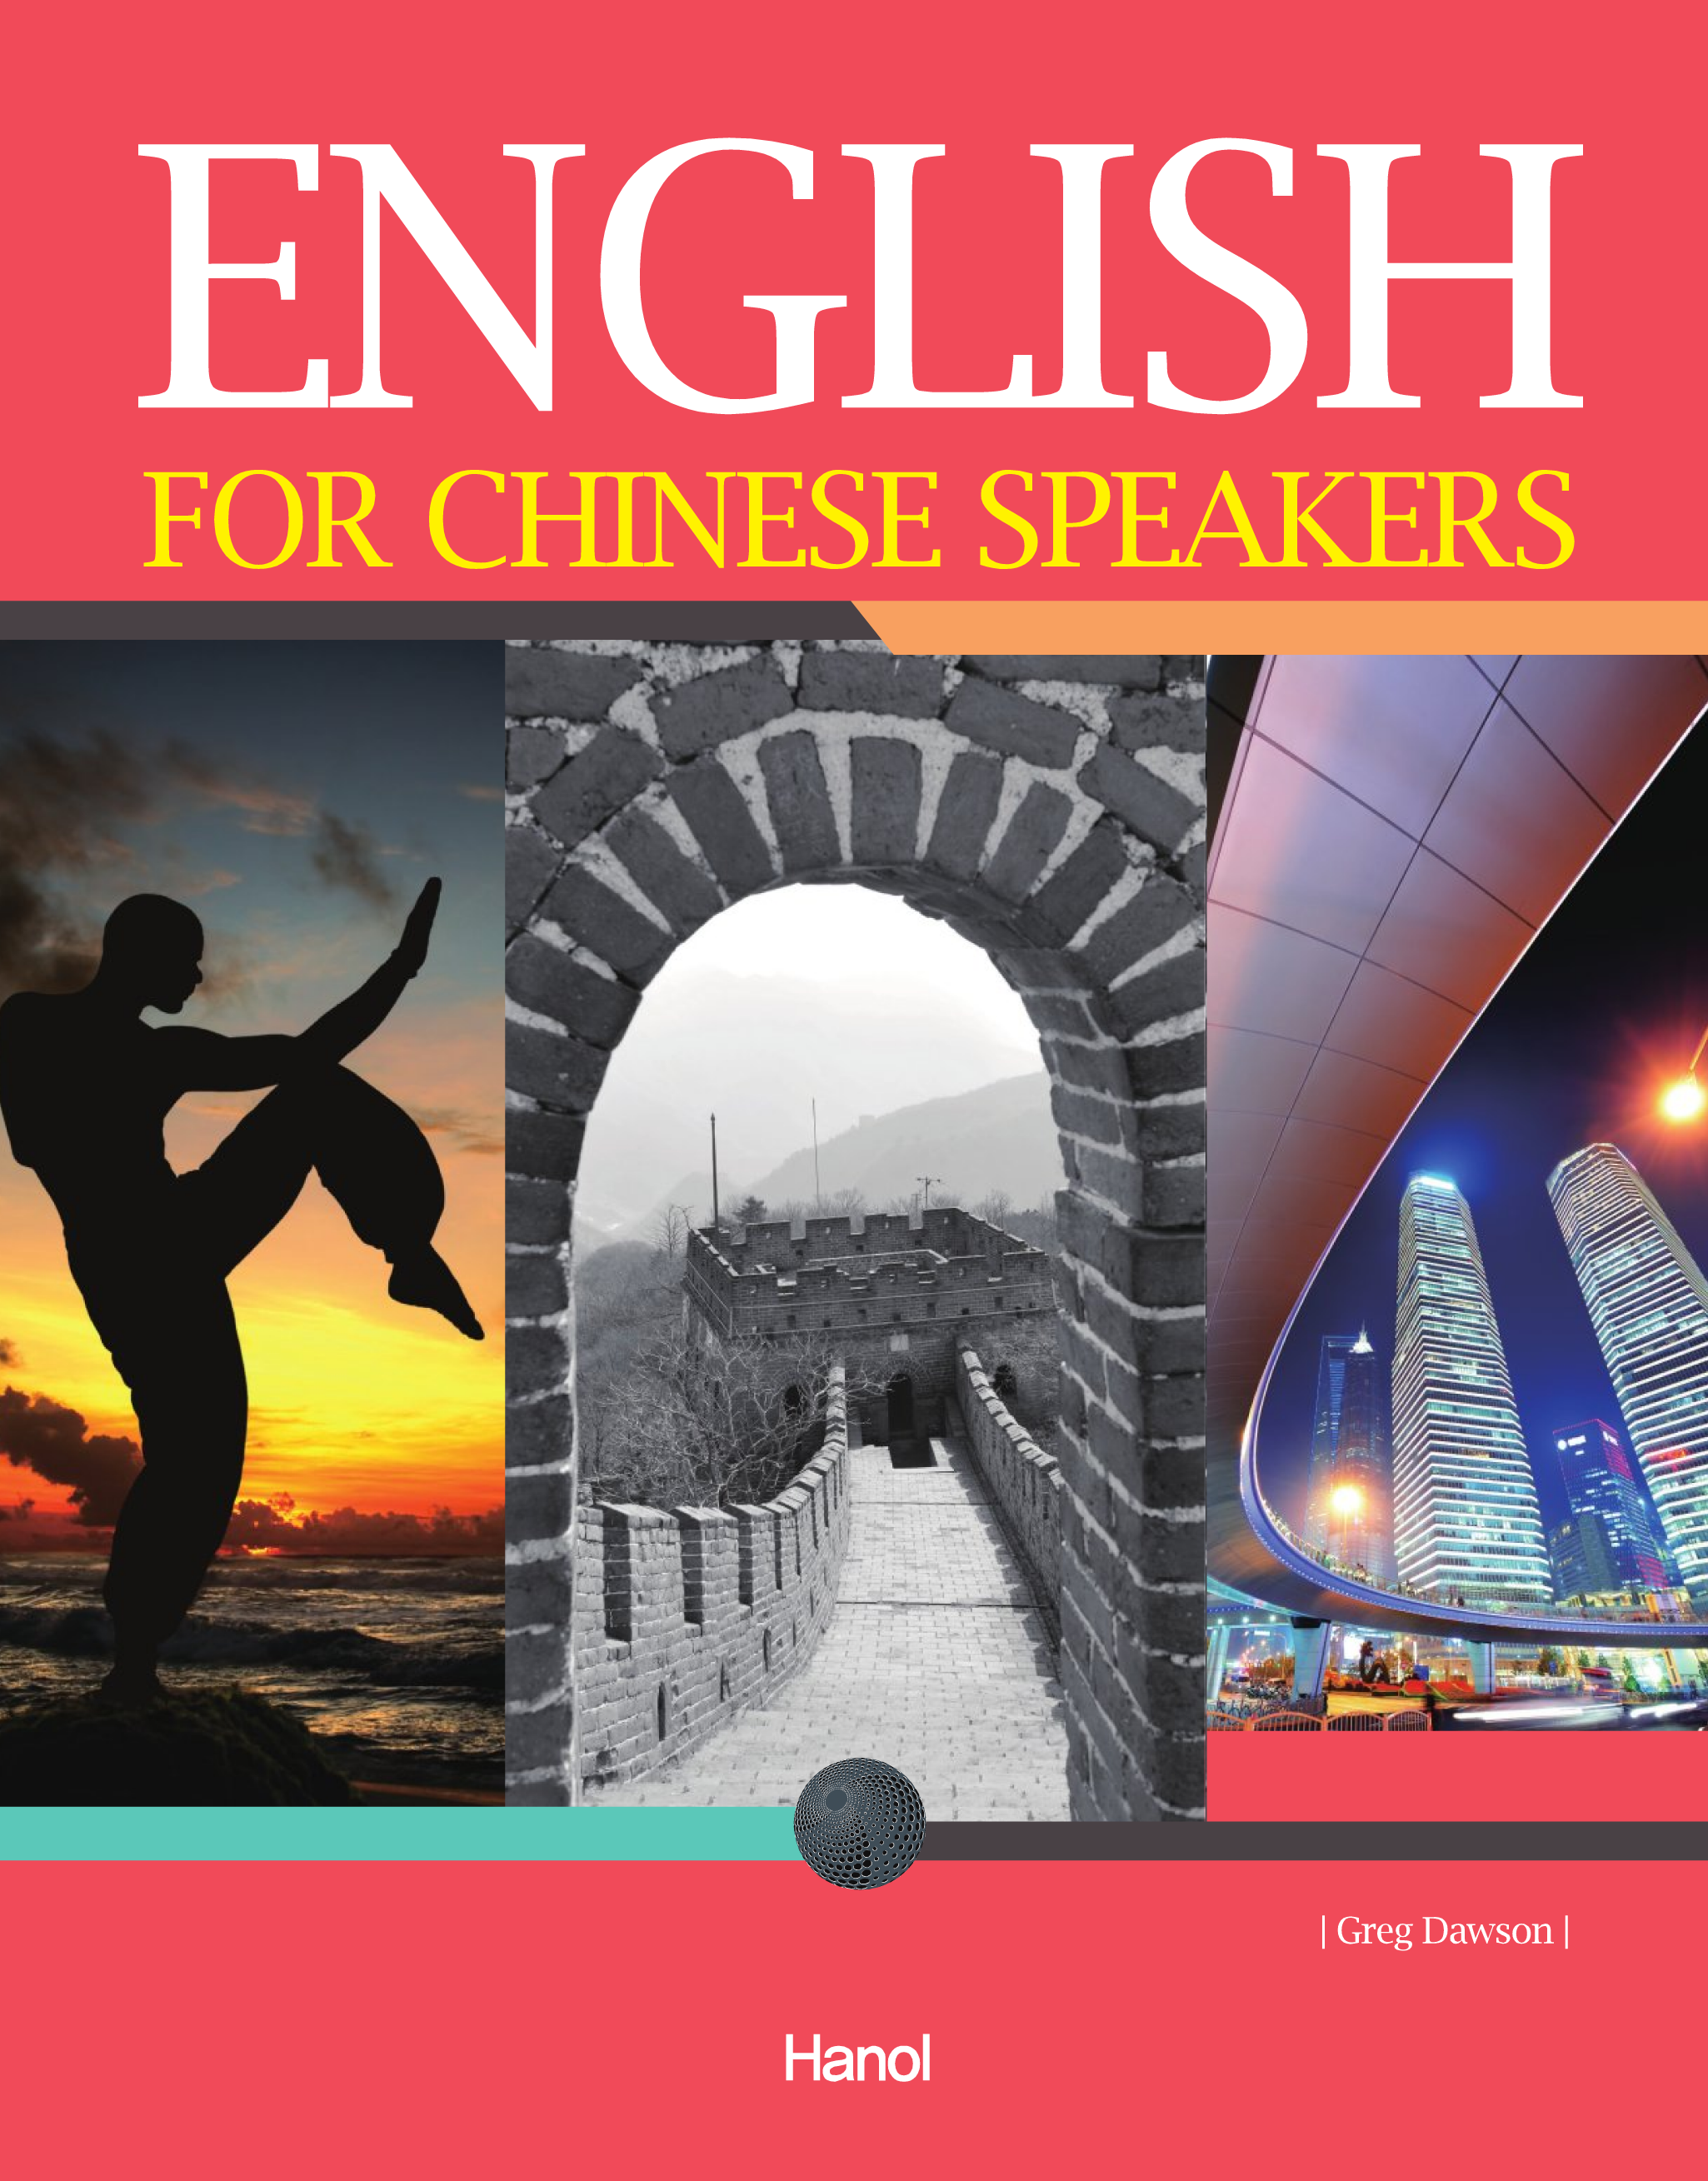 ENGLISH FOR CHINESE SPEAKERS